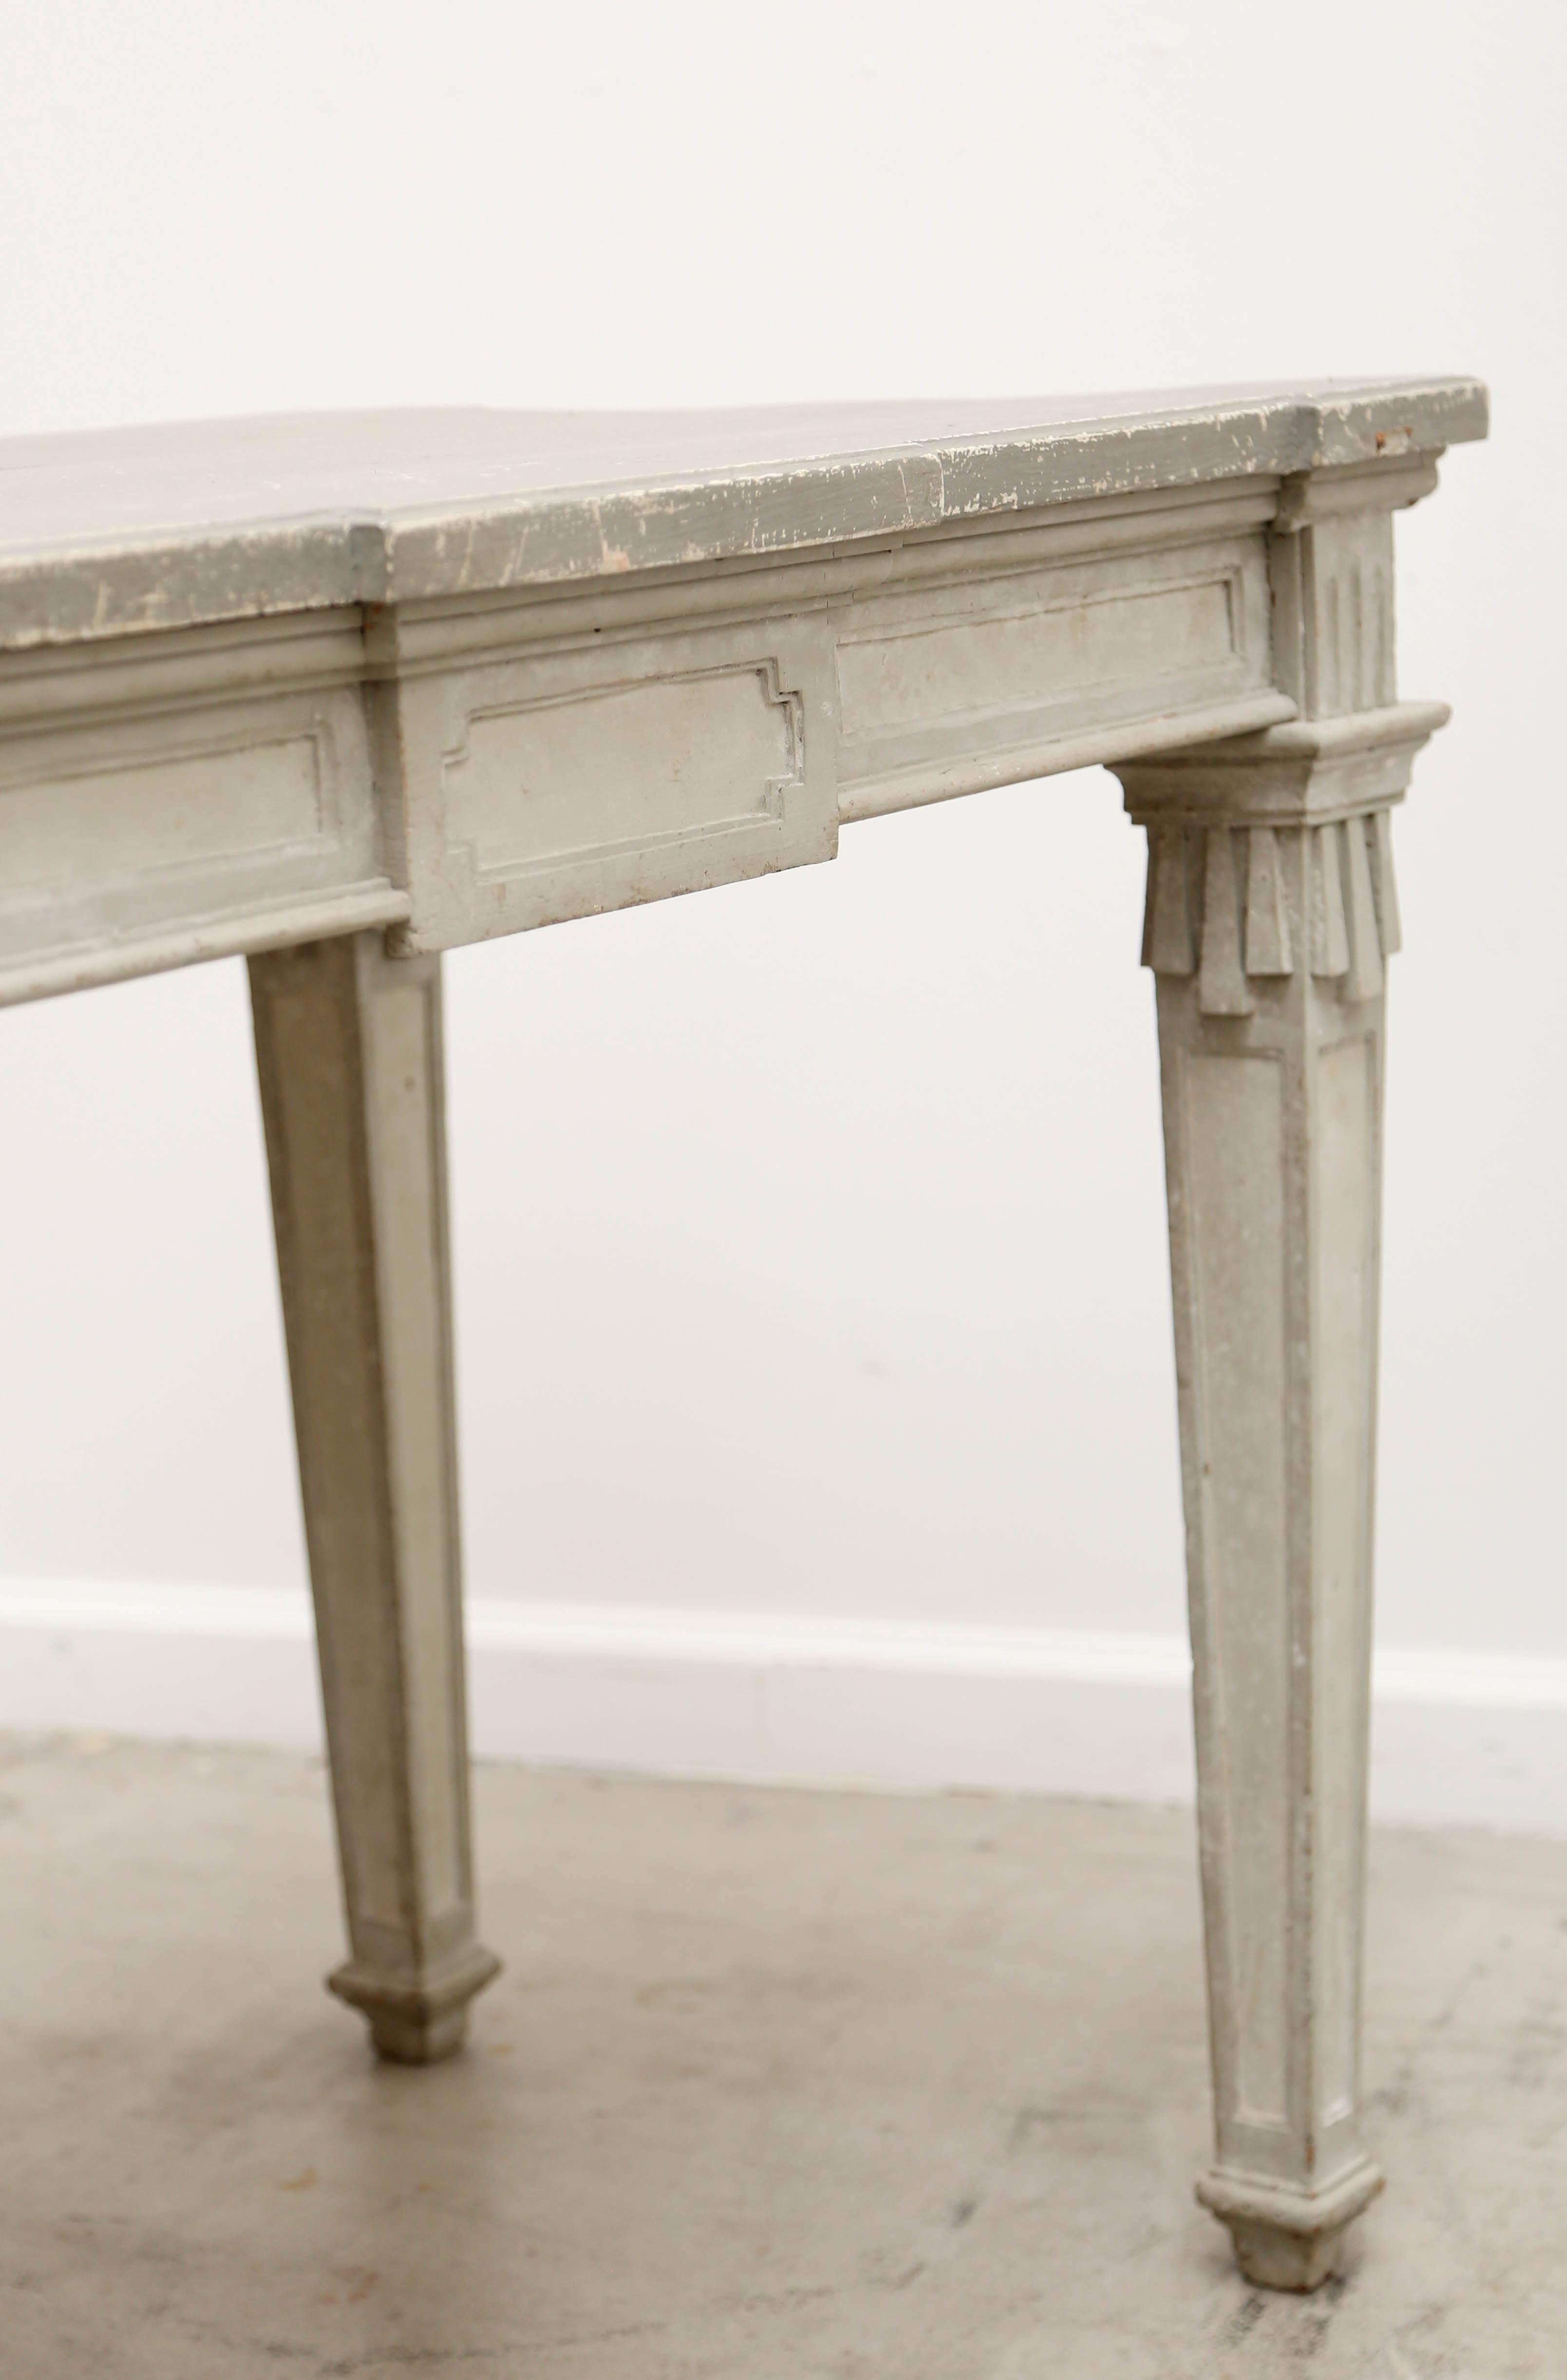 Wood Antique Swedish Period Gustavian Painted Console Table Early 19th Century